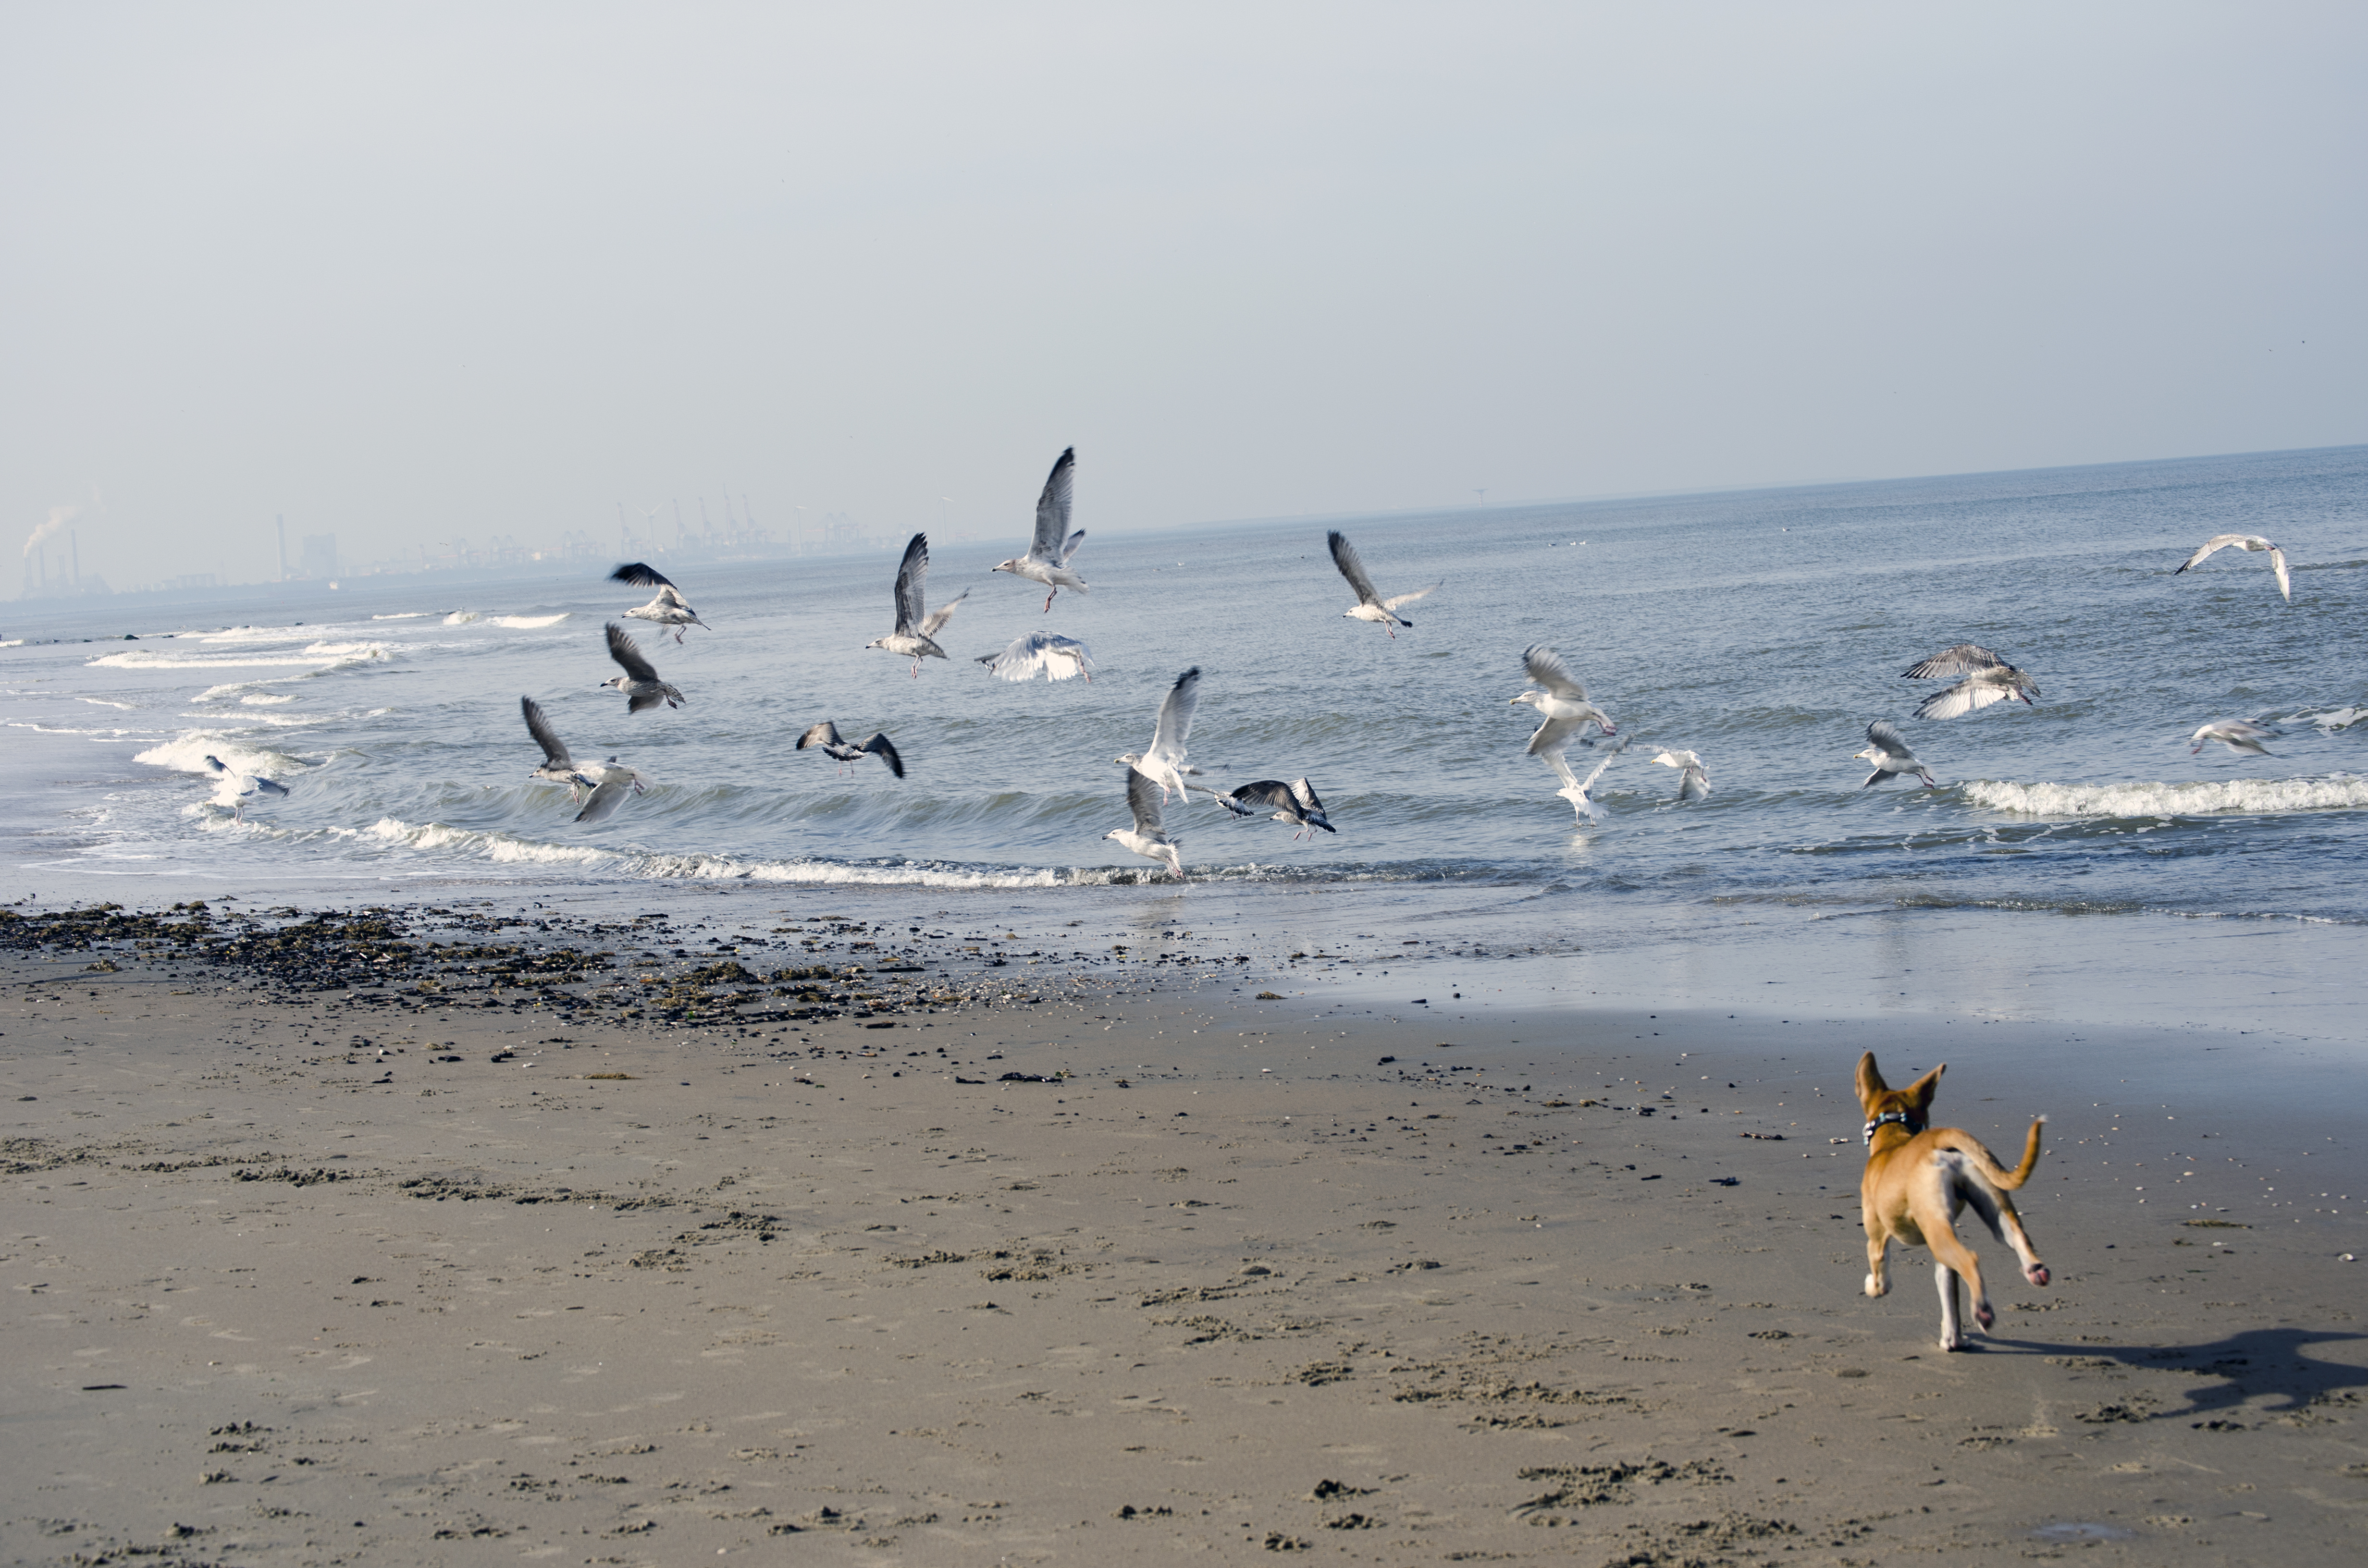 Dog running and chasing seagulls on the coastline